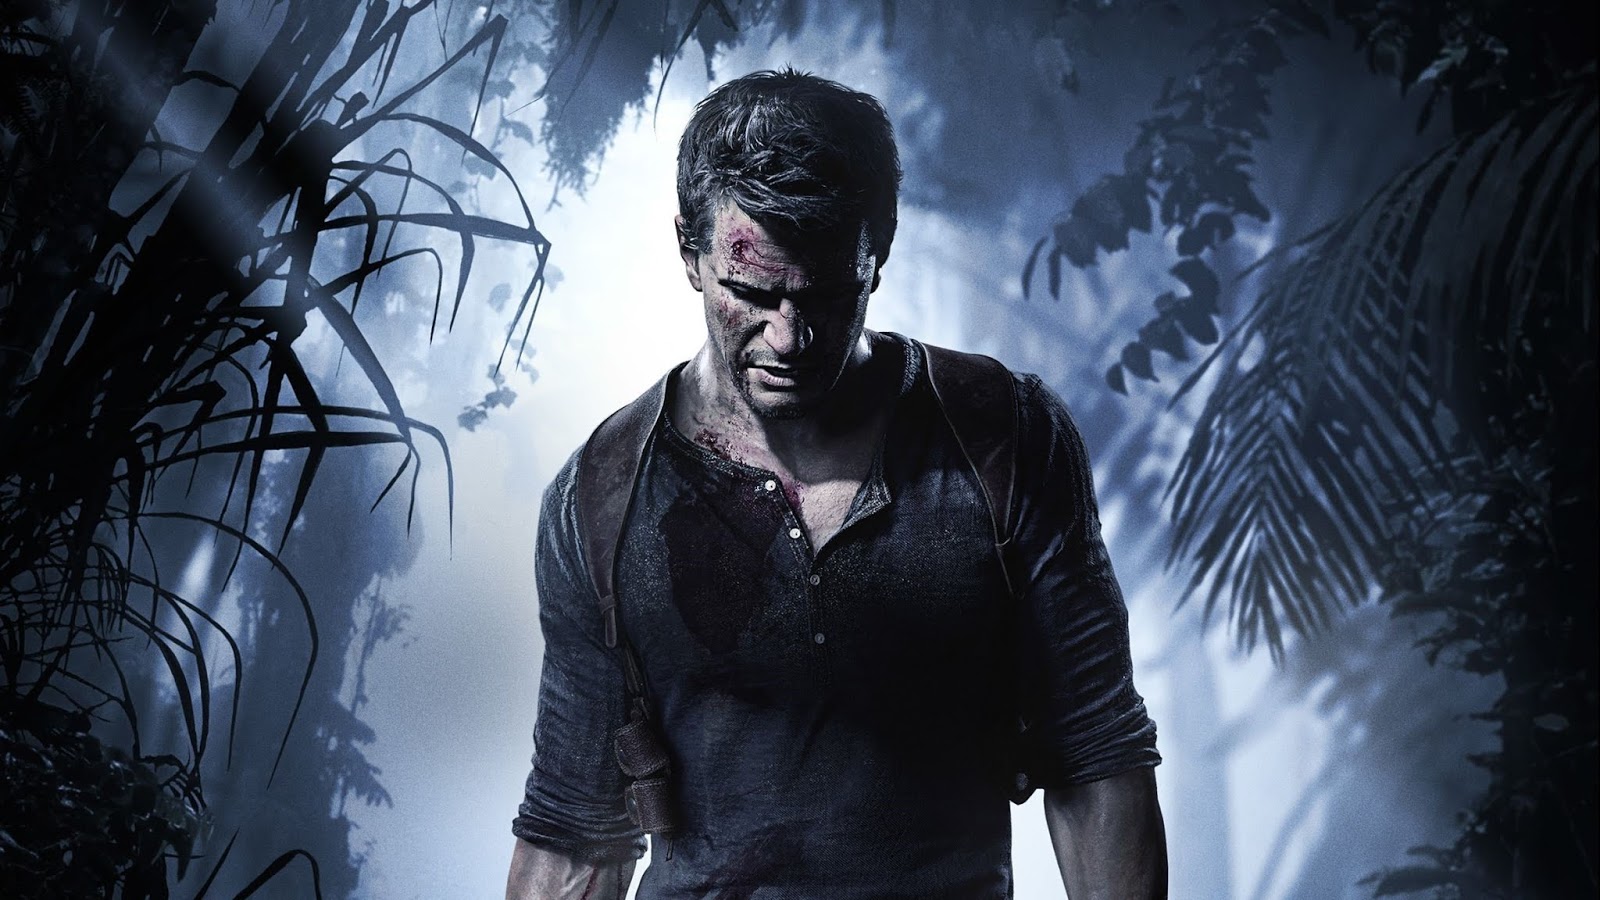 The Uncharted movie will not adopt the games directly